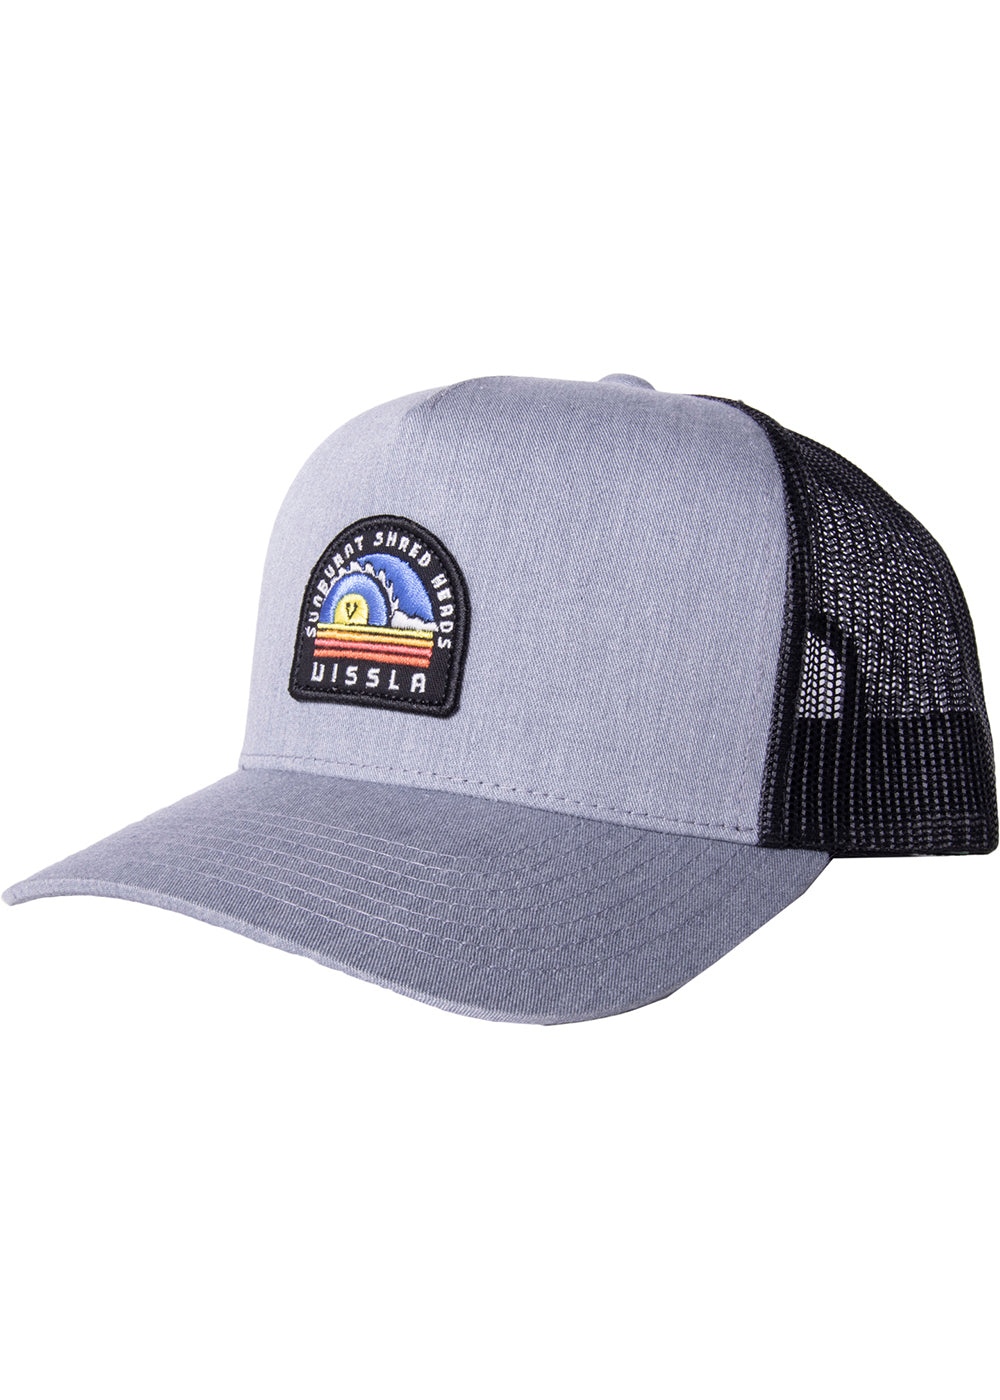 Vissla Grey Heather Solid Sets Eco Trucker Hat with Patch Front View 